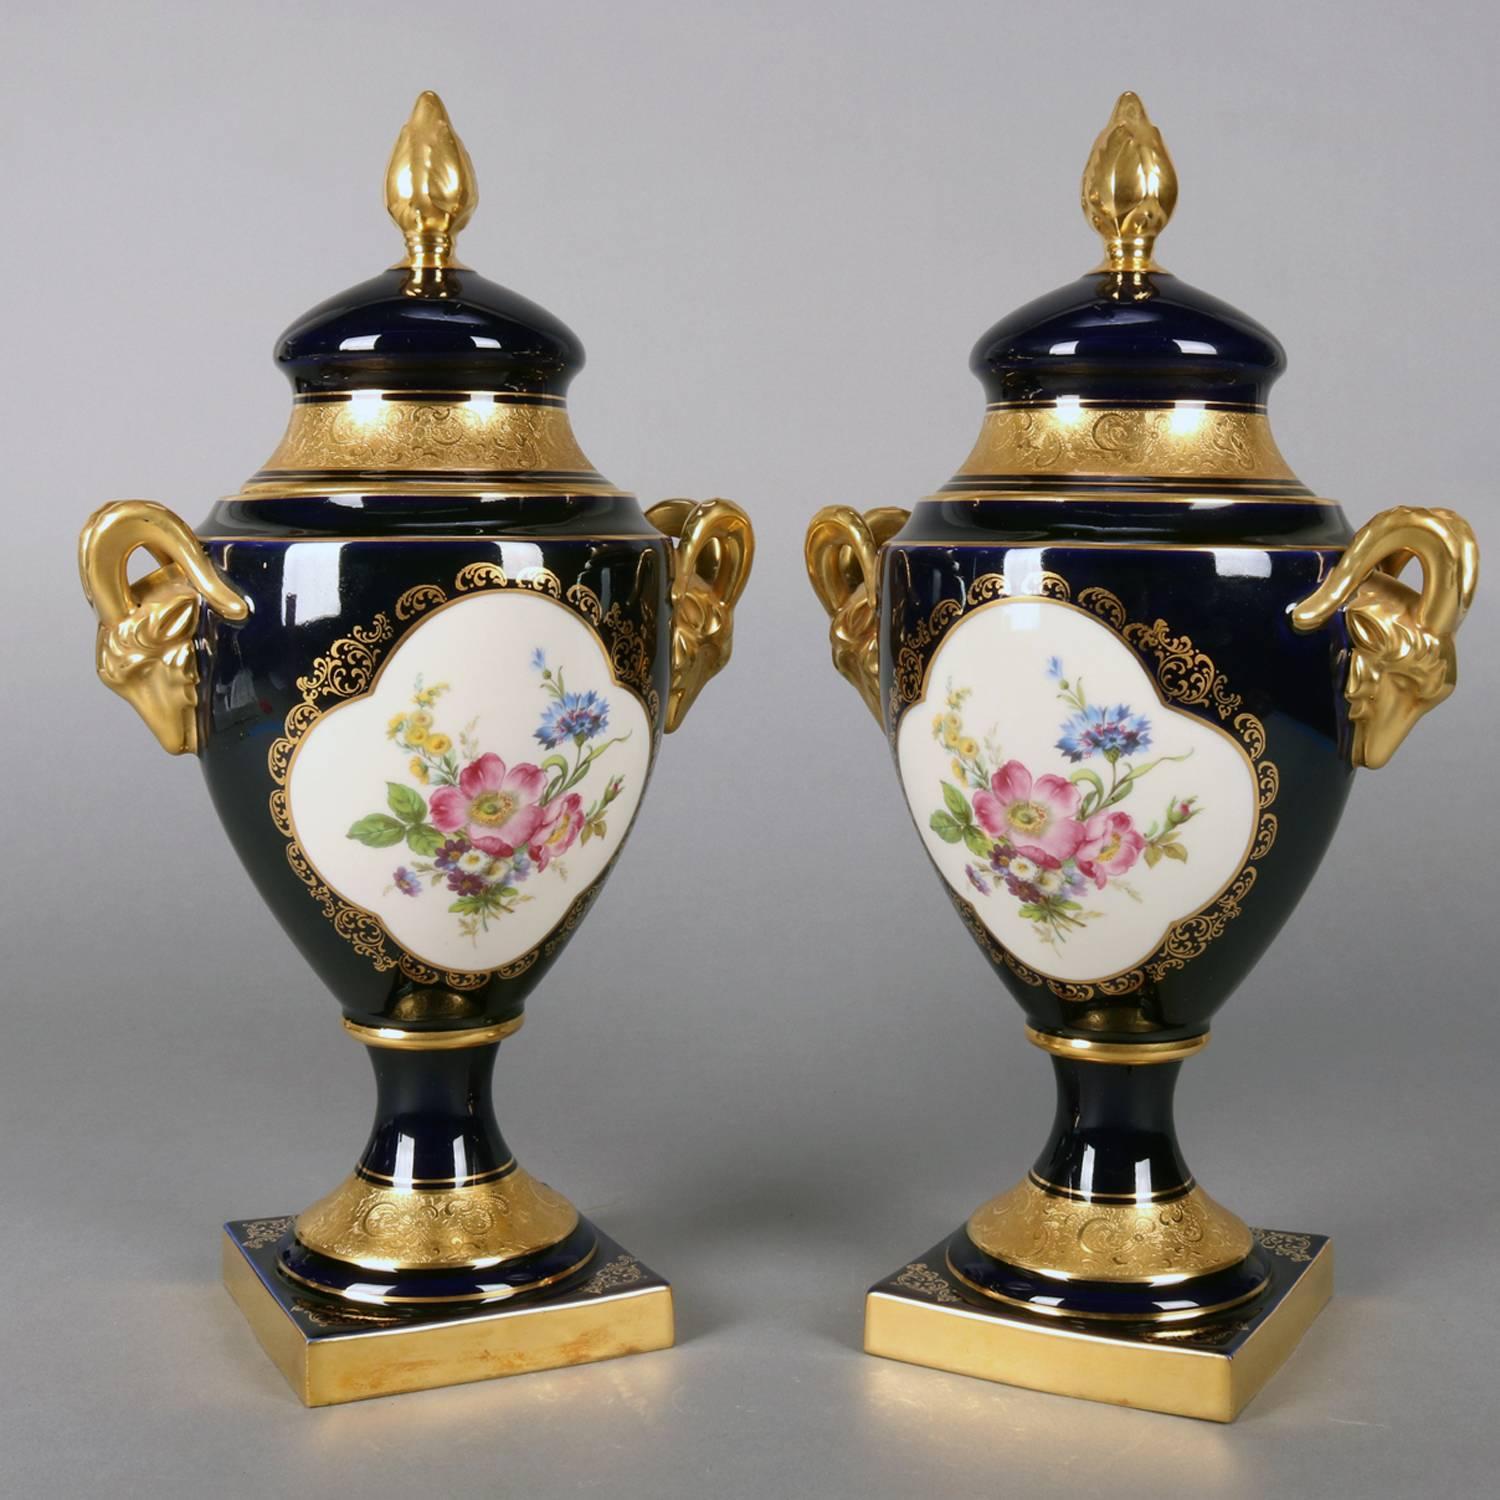 Western German Meissen School porcelain urns feature hand-painted floral reserves on cobalt blue ground and with heavily gilt highlights including ram's head handles, en verso 